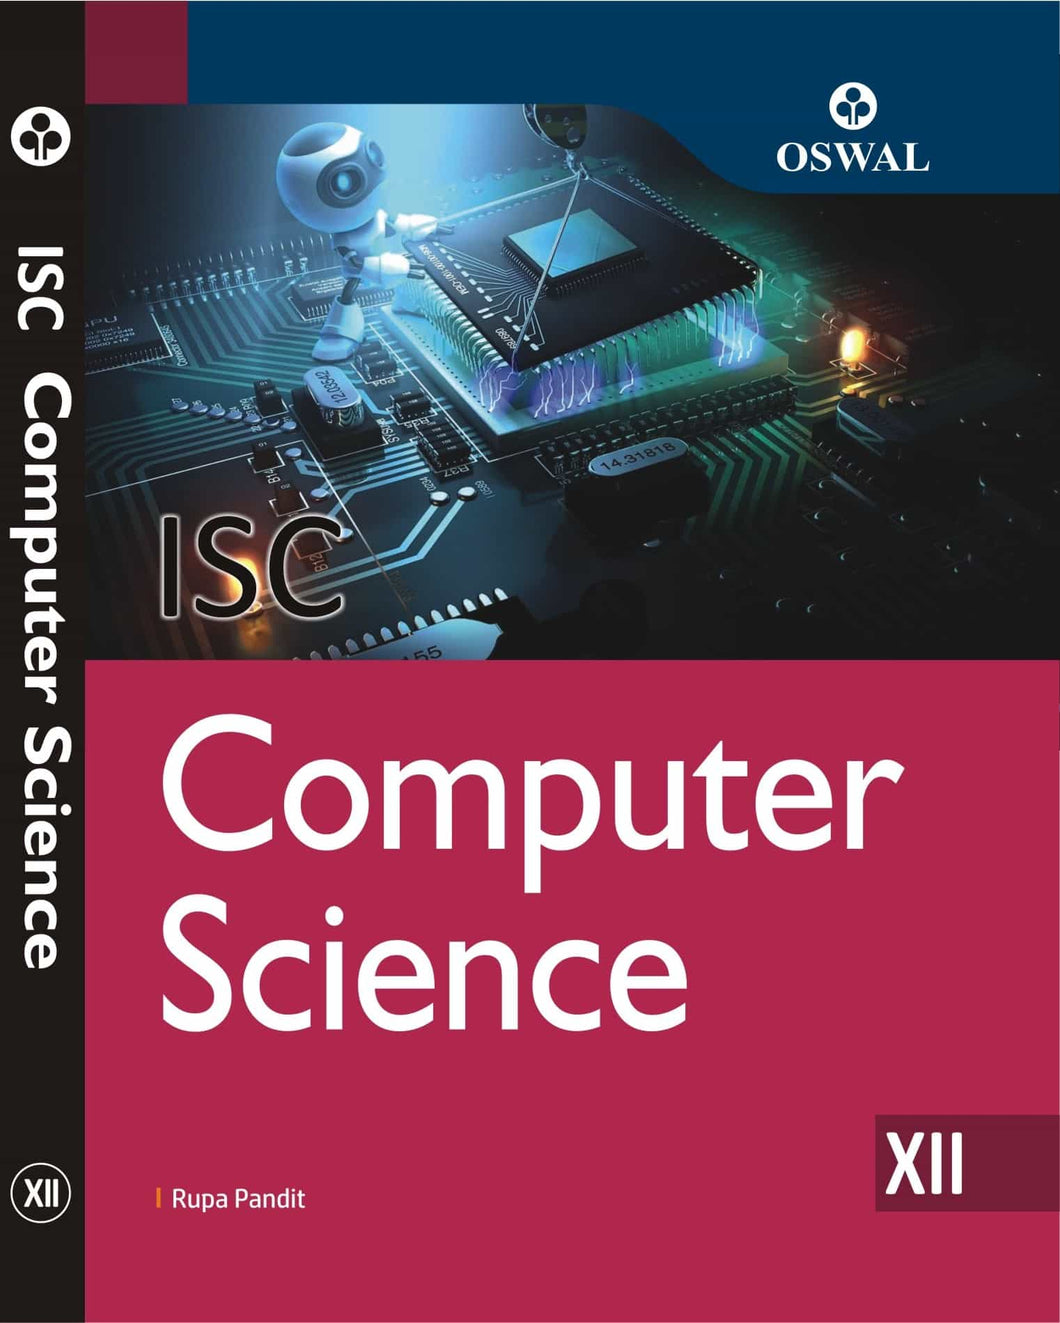 Oswal Computer Science: Textbook for ISC Class 12